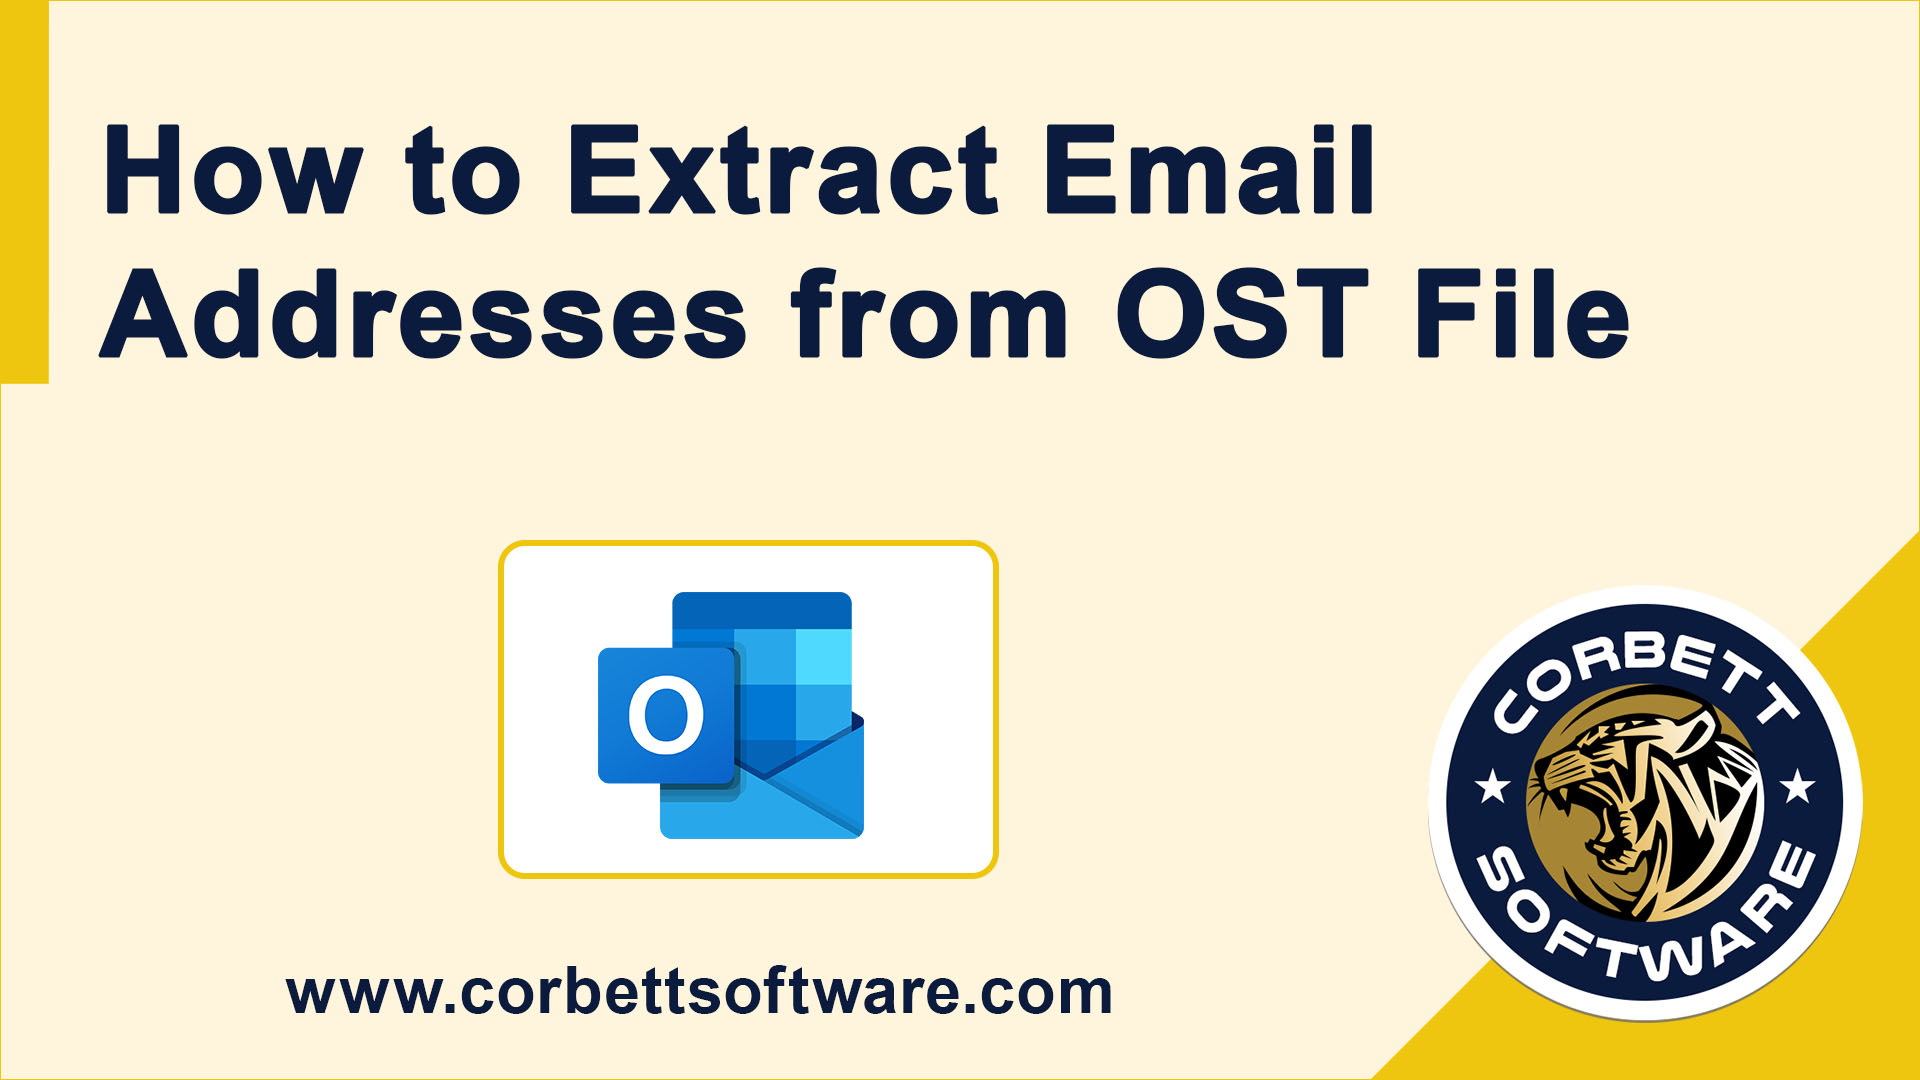 How to extract email addresses from OST File